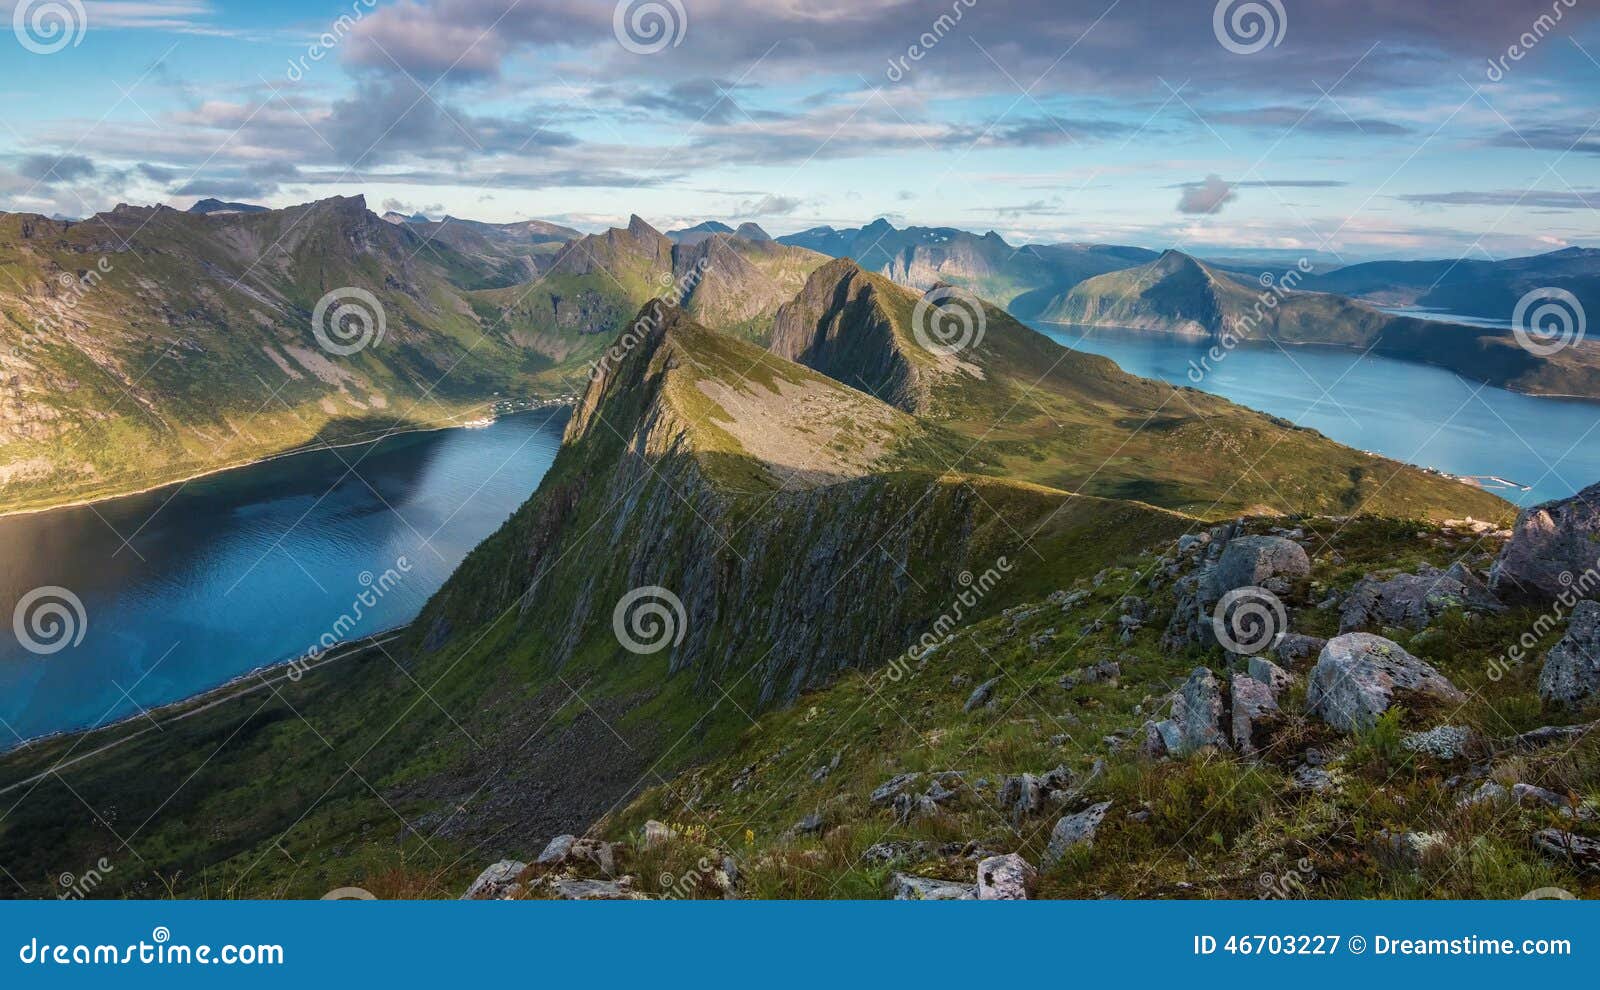 Norwegian landscape of mountains and rivers